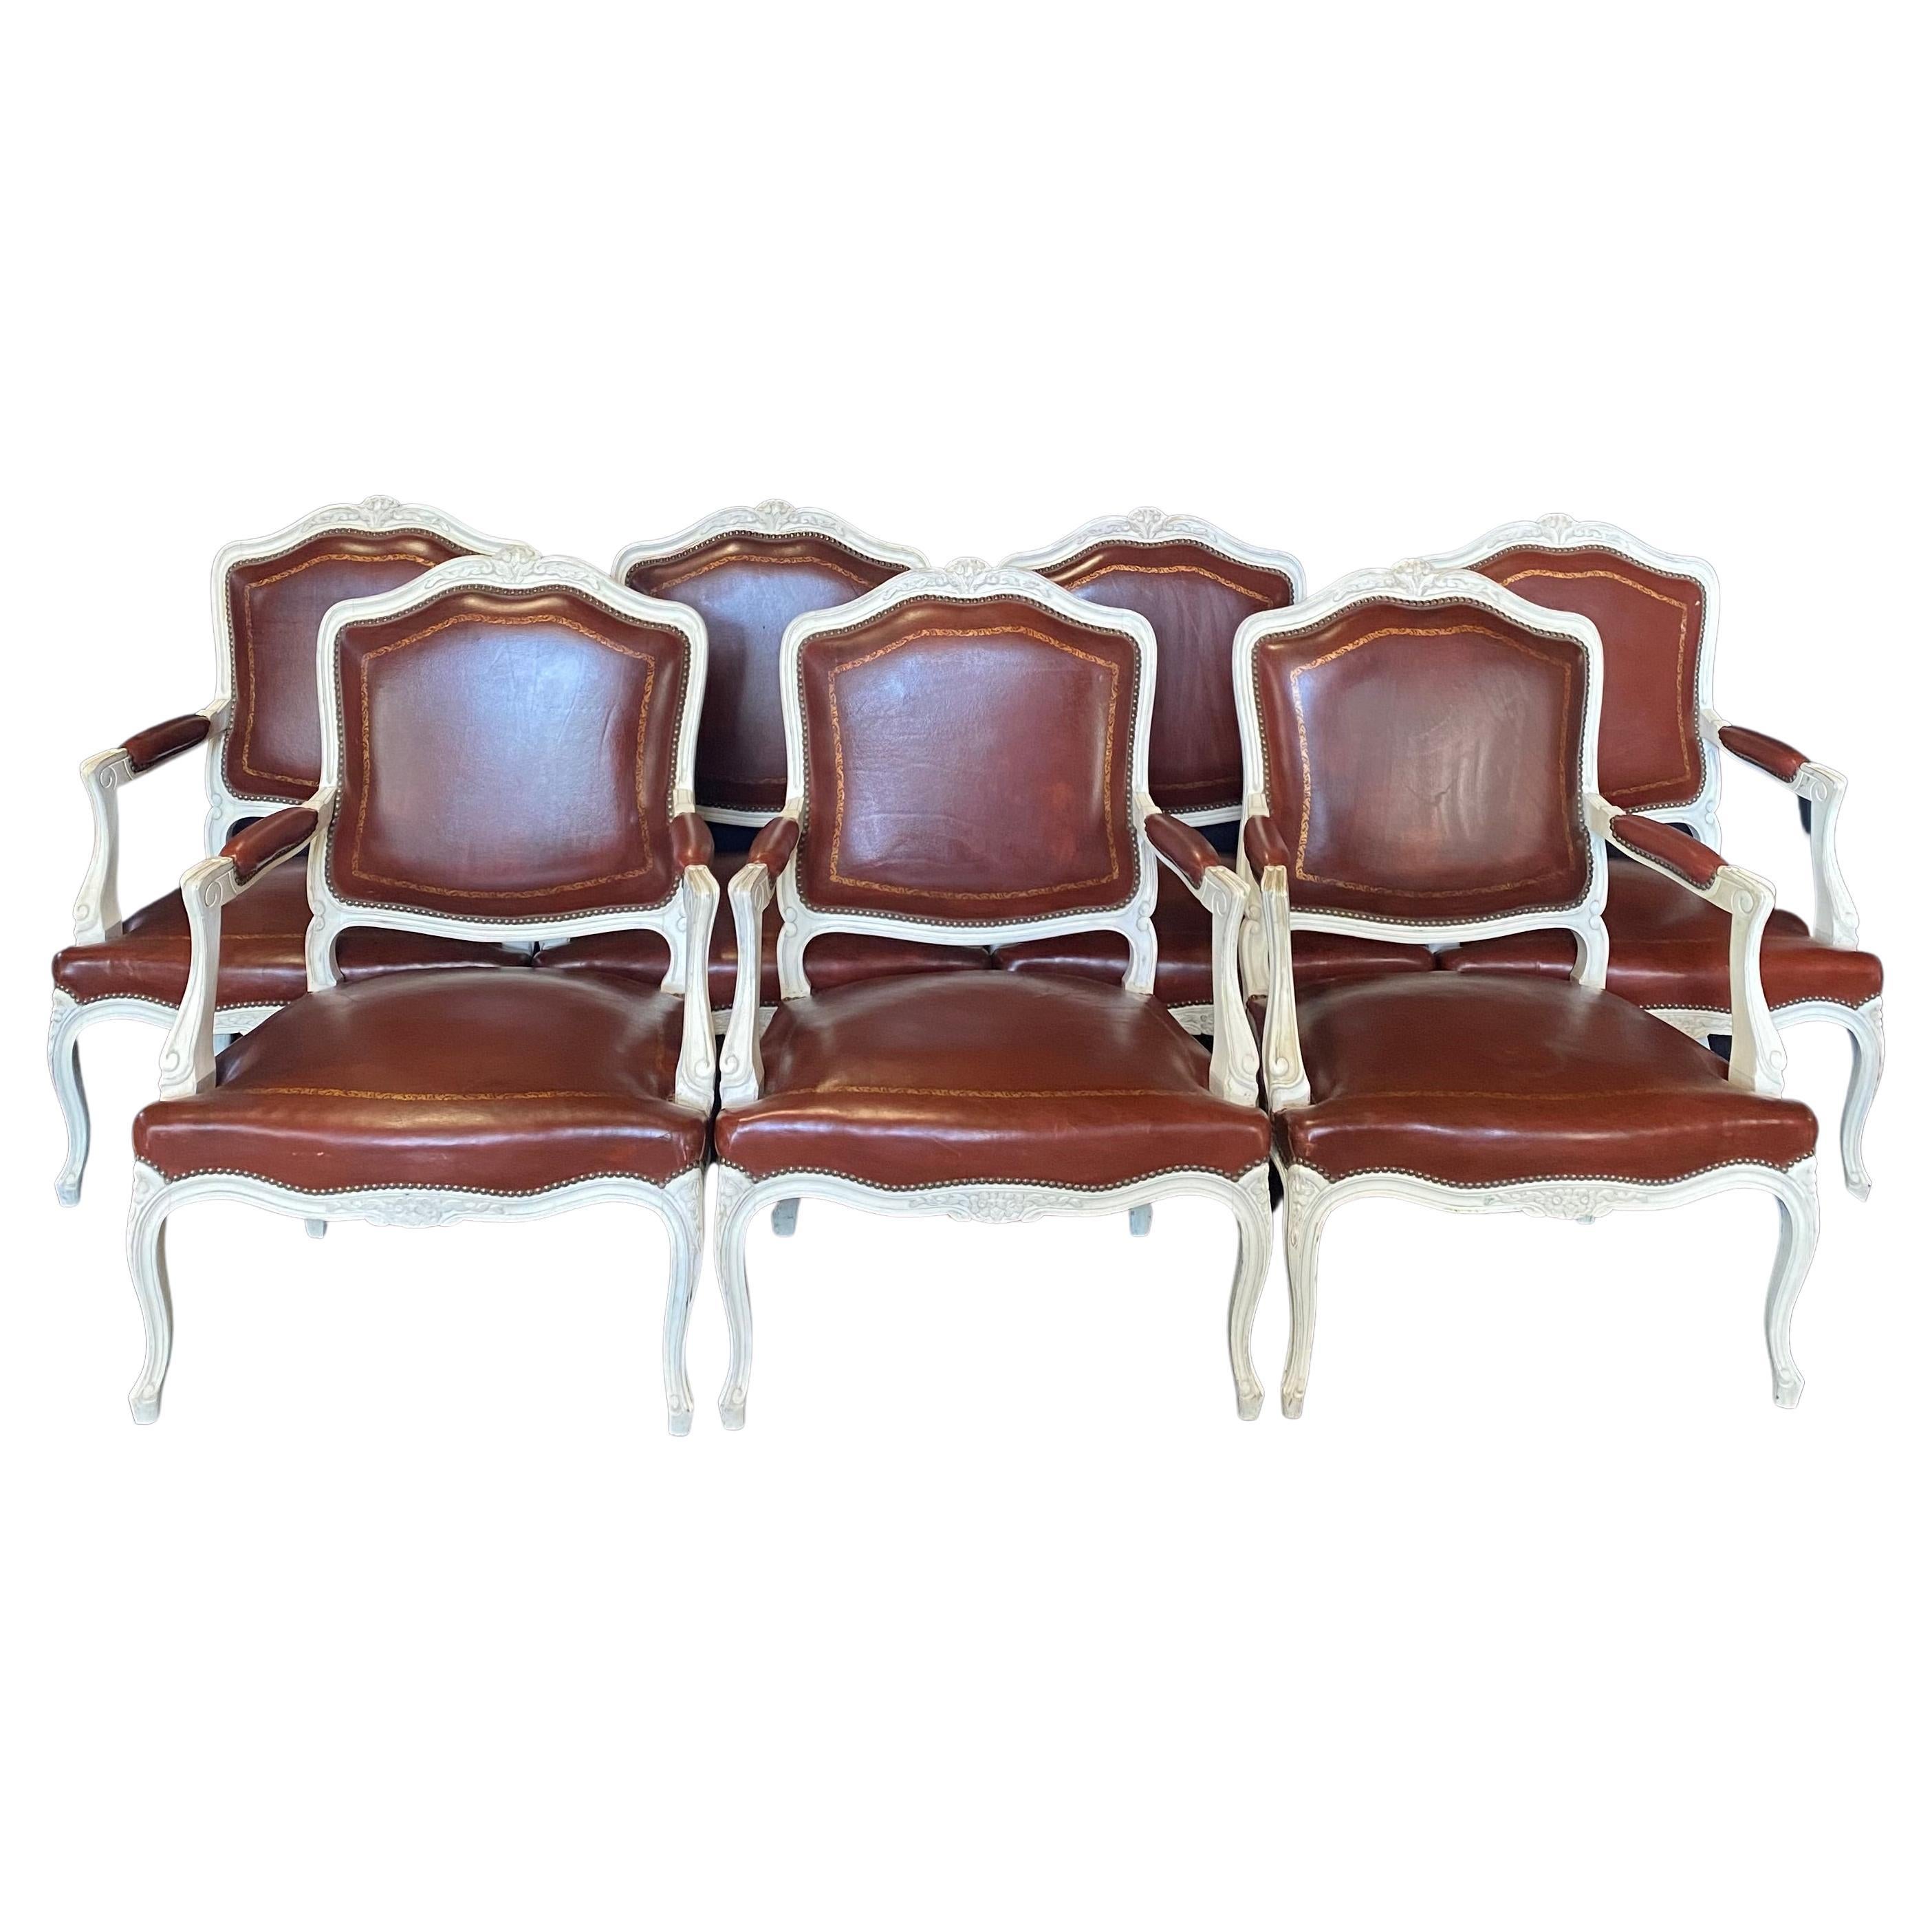 Sumptuous Set of 7 Louis XV Leather Embossed Painted Wood Armchairs